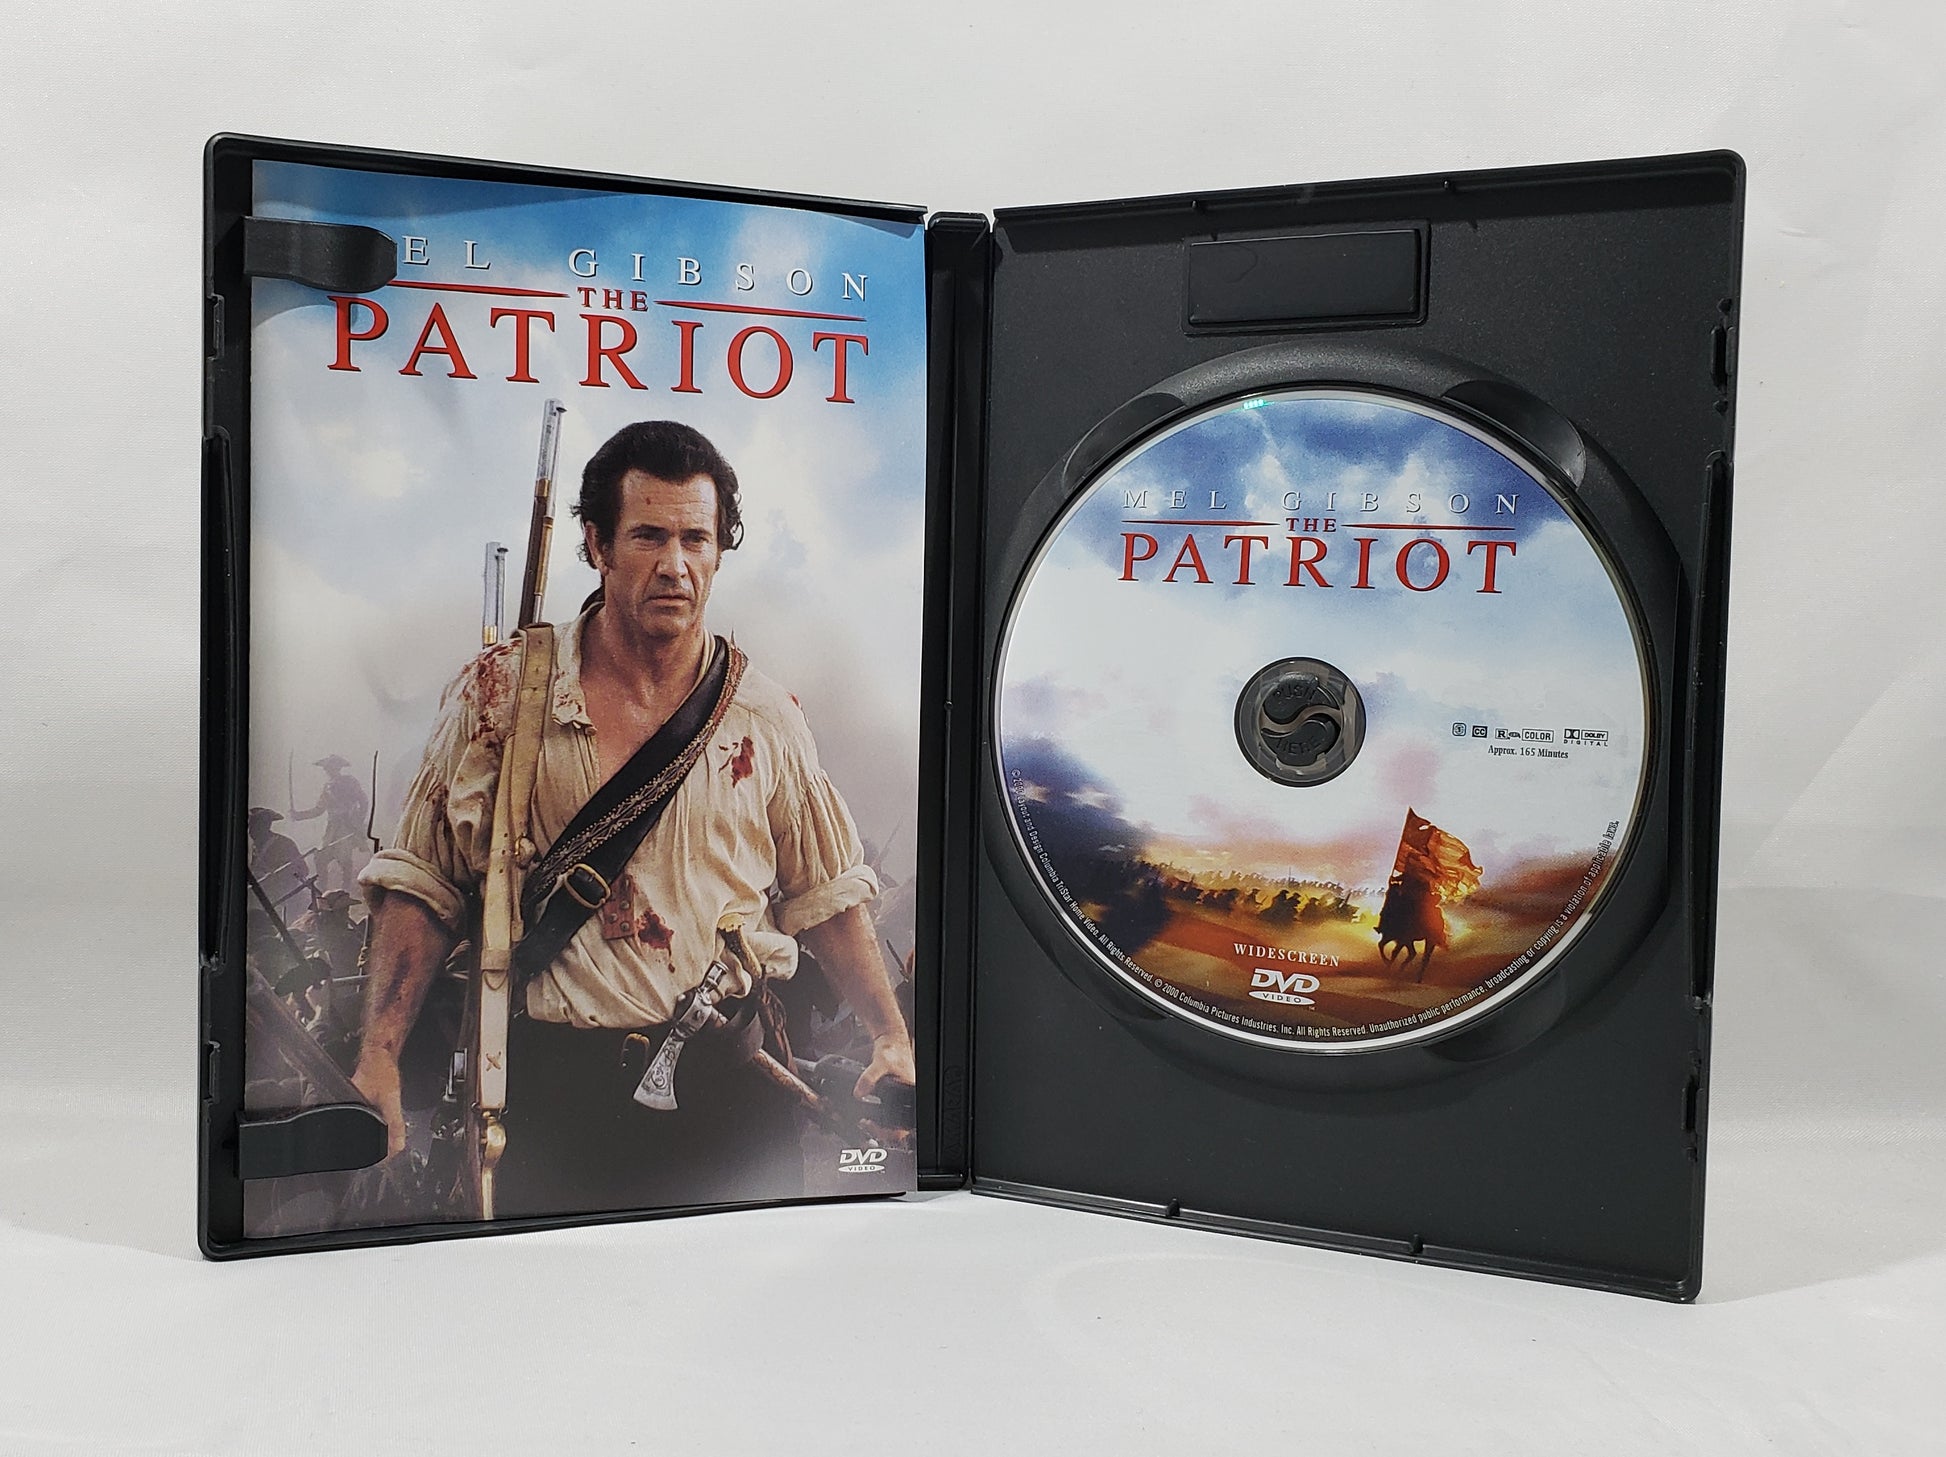 DVD: The Patriot (2000, Special Edition)